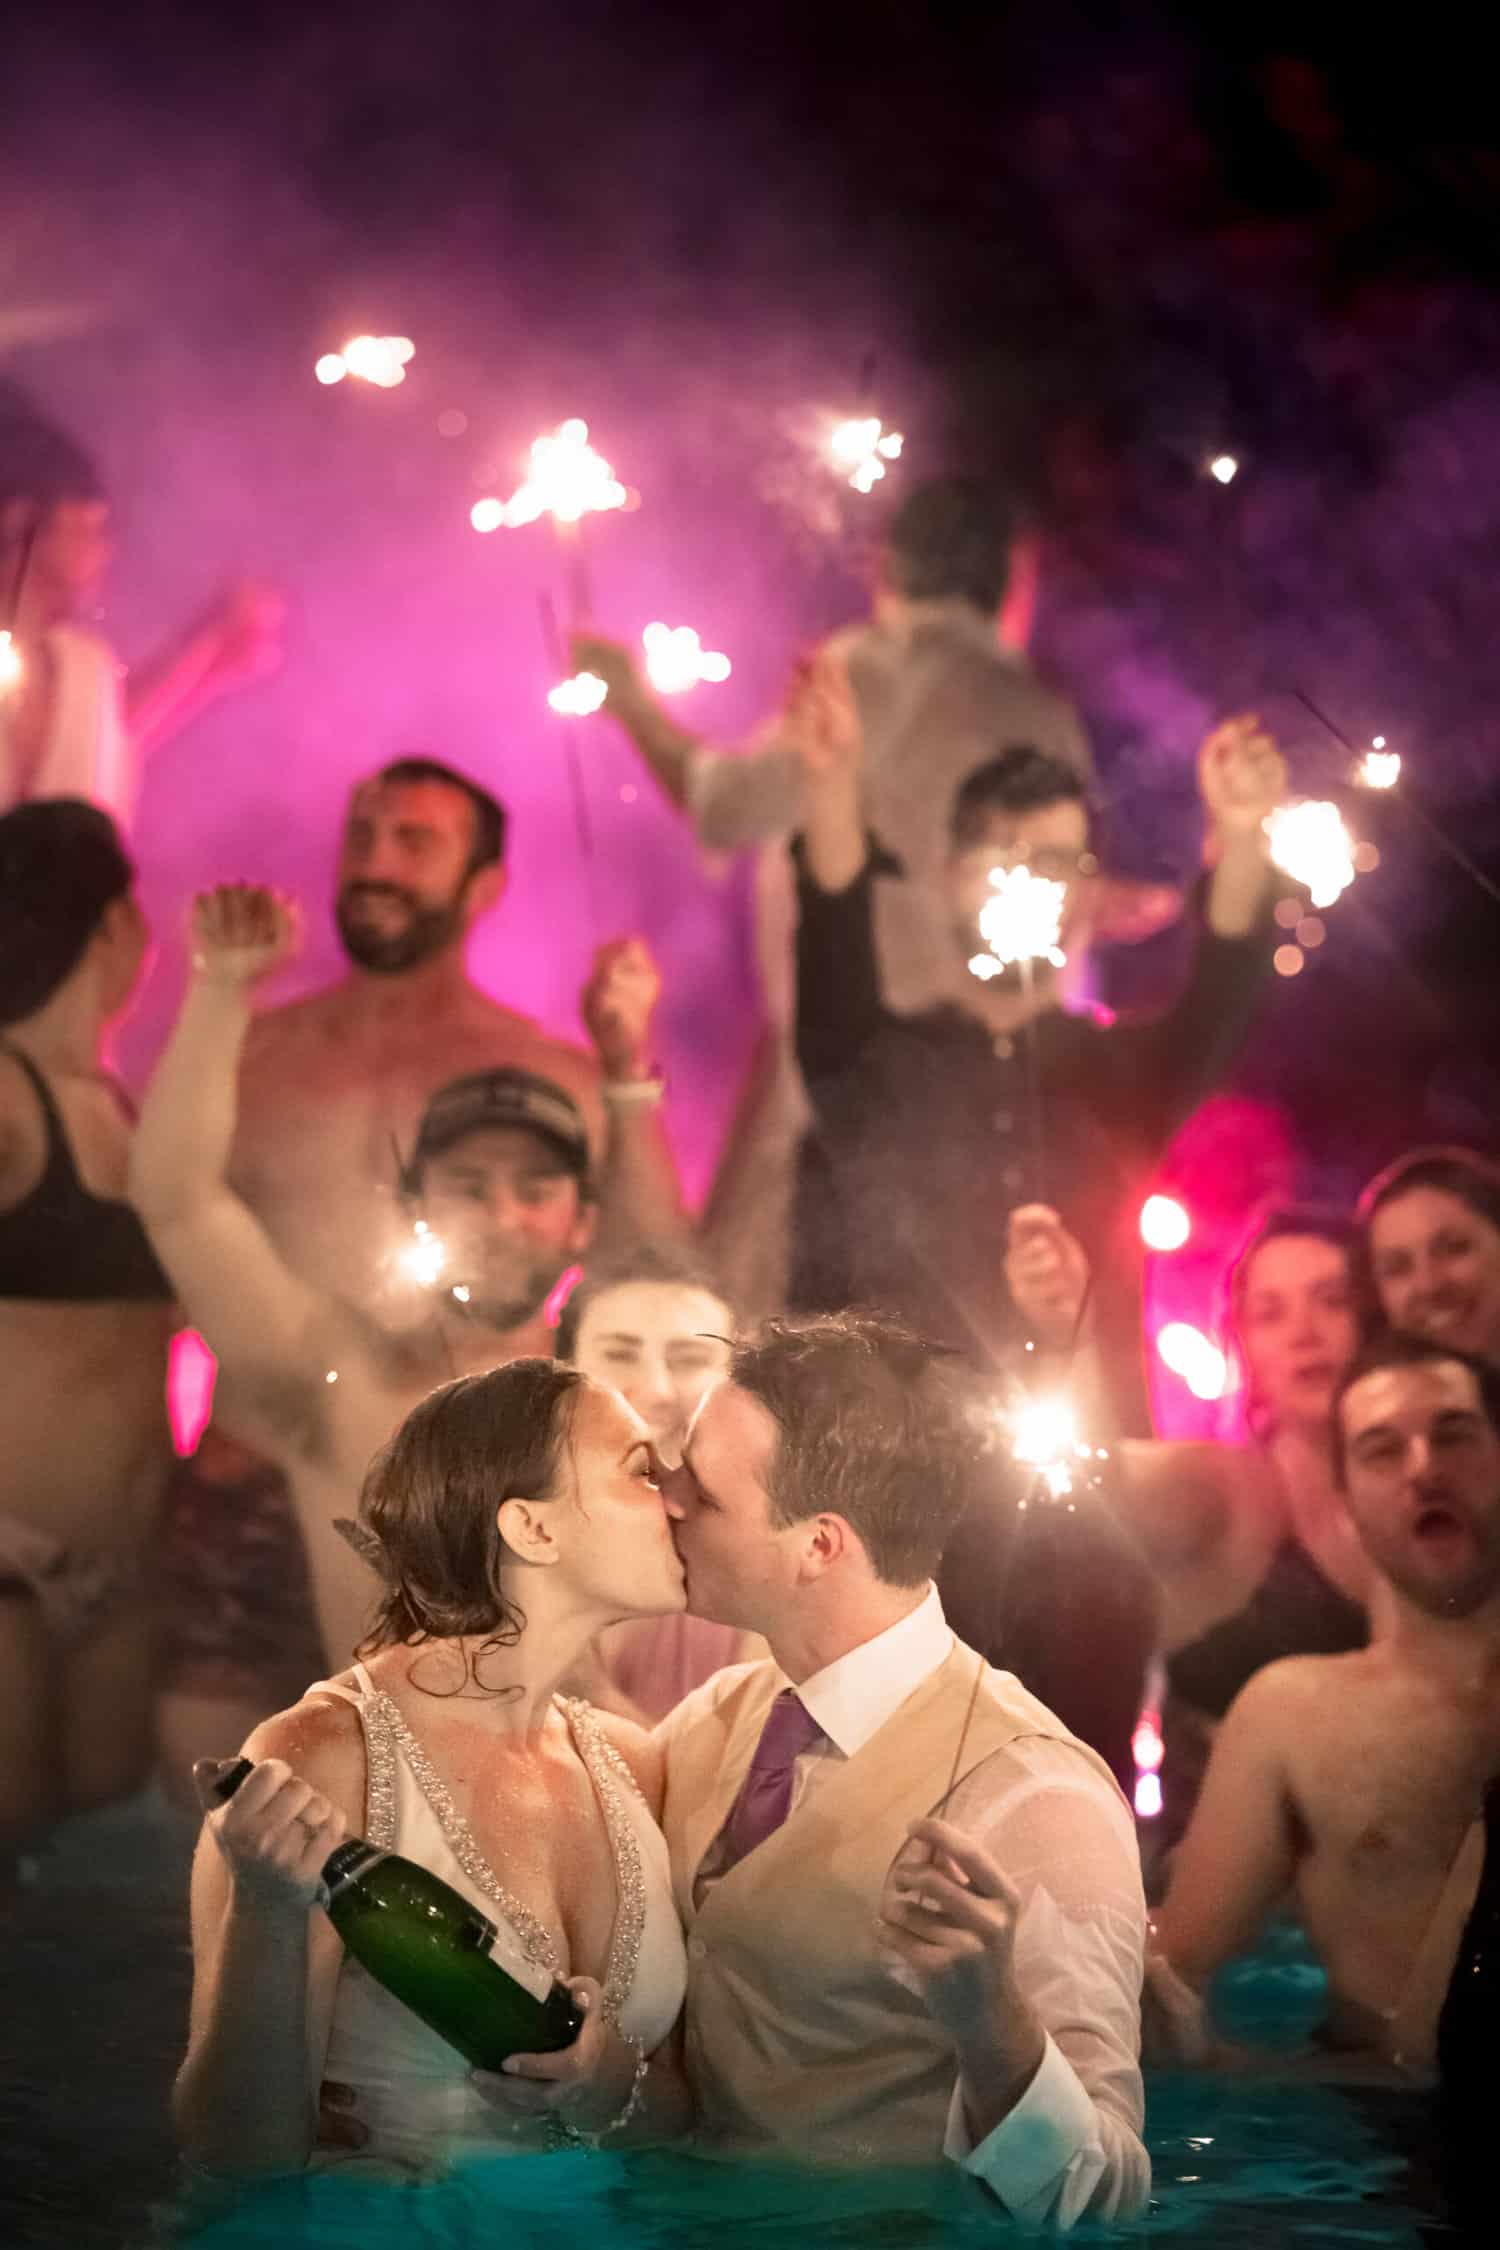 A bride and groom kissing in a pool with sparklers.